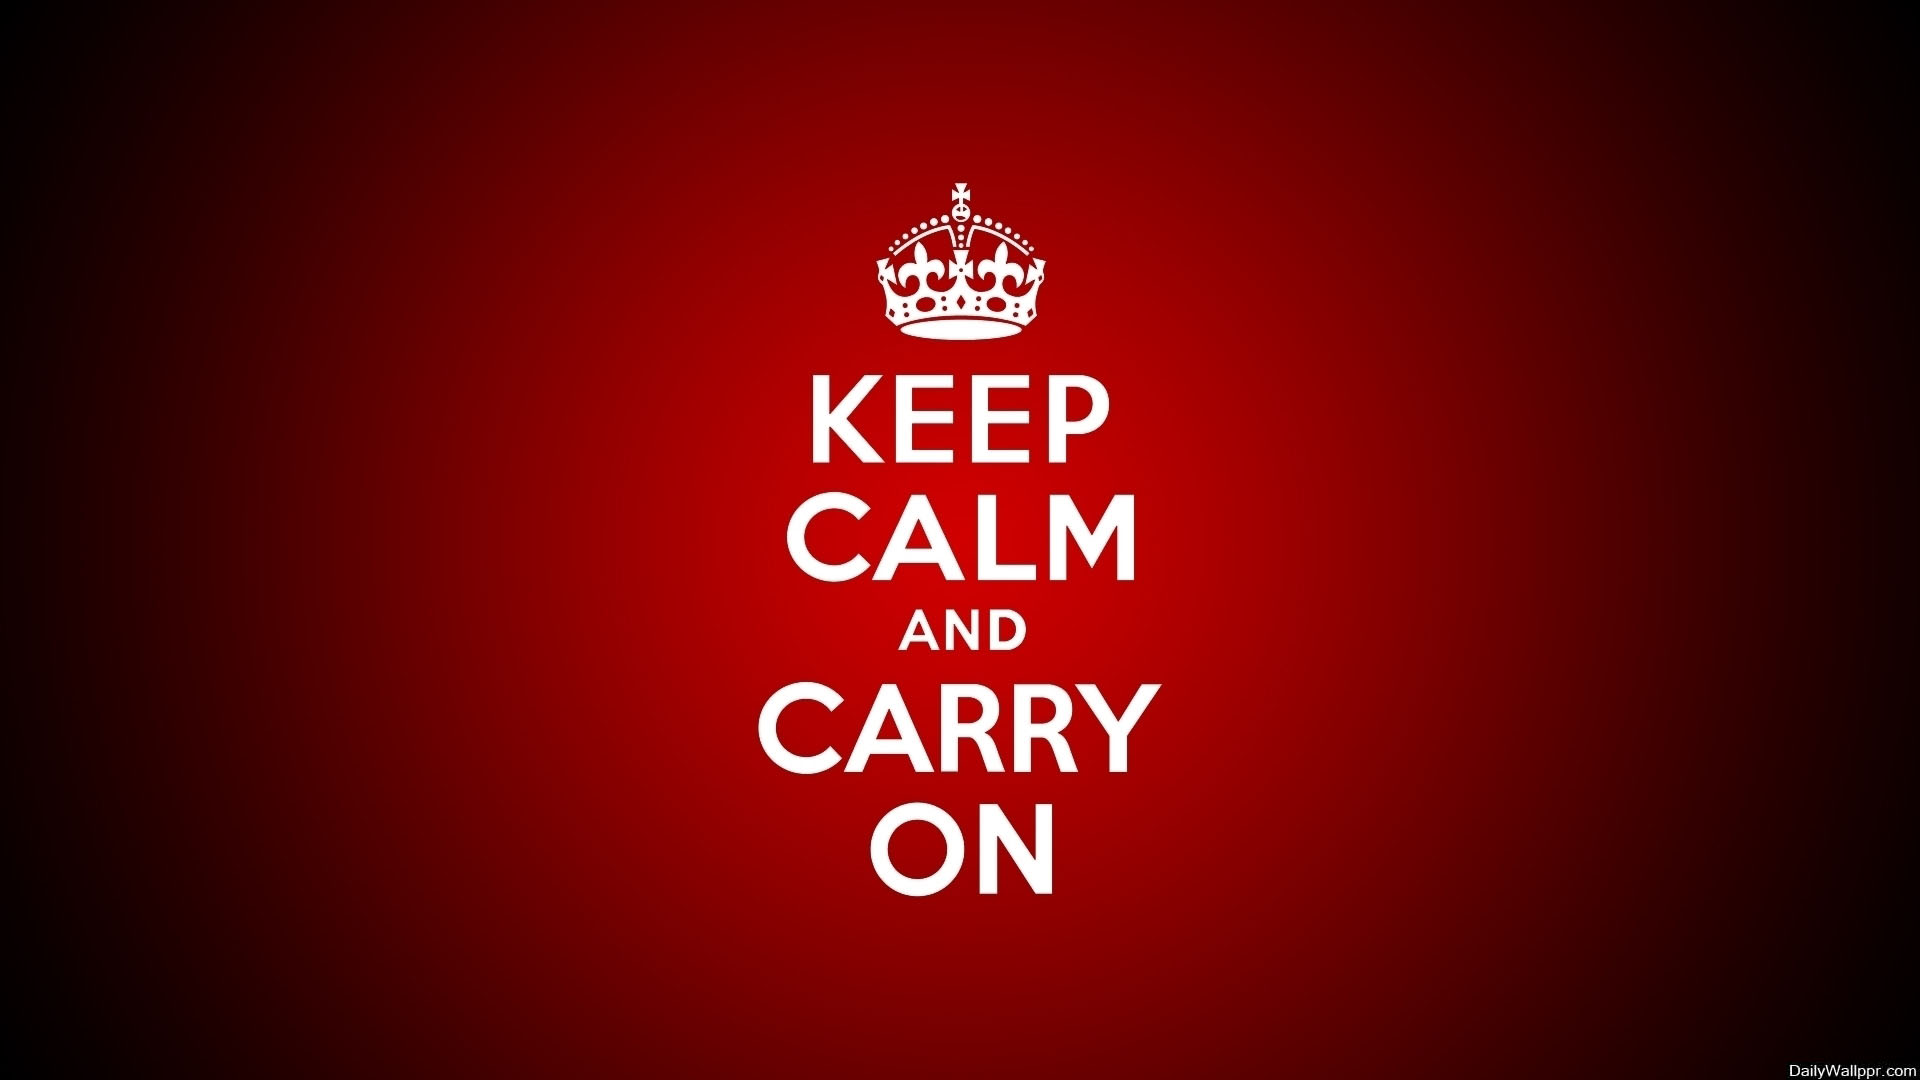 Keep calm and carry on wallpaper 1920x1080